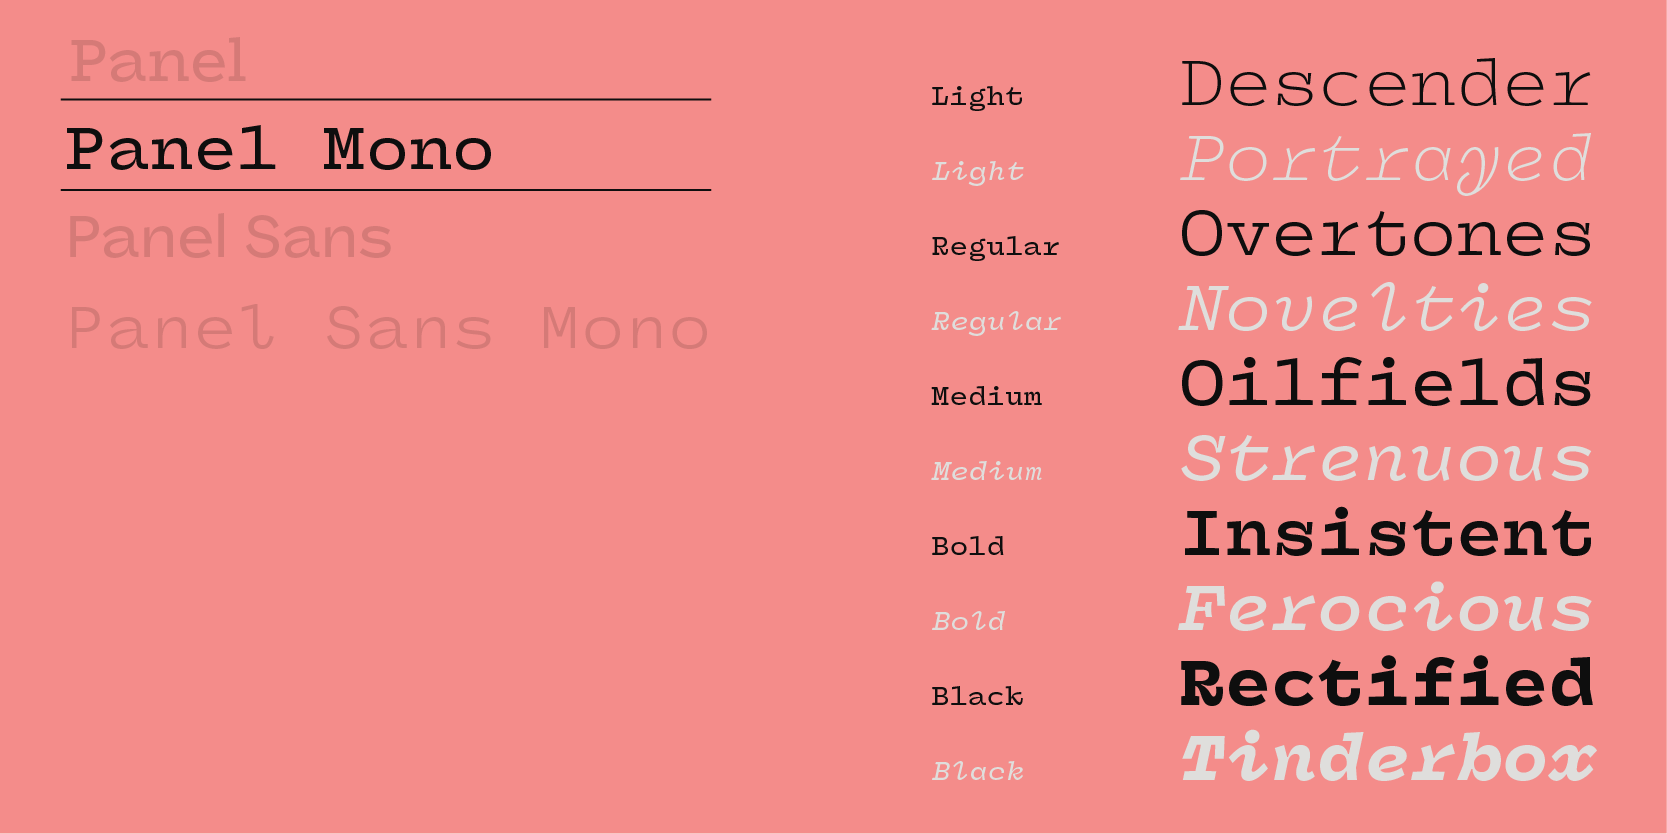 Card displaying Panel Mono typeface in various styles